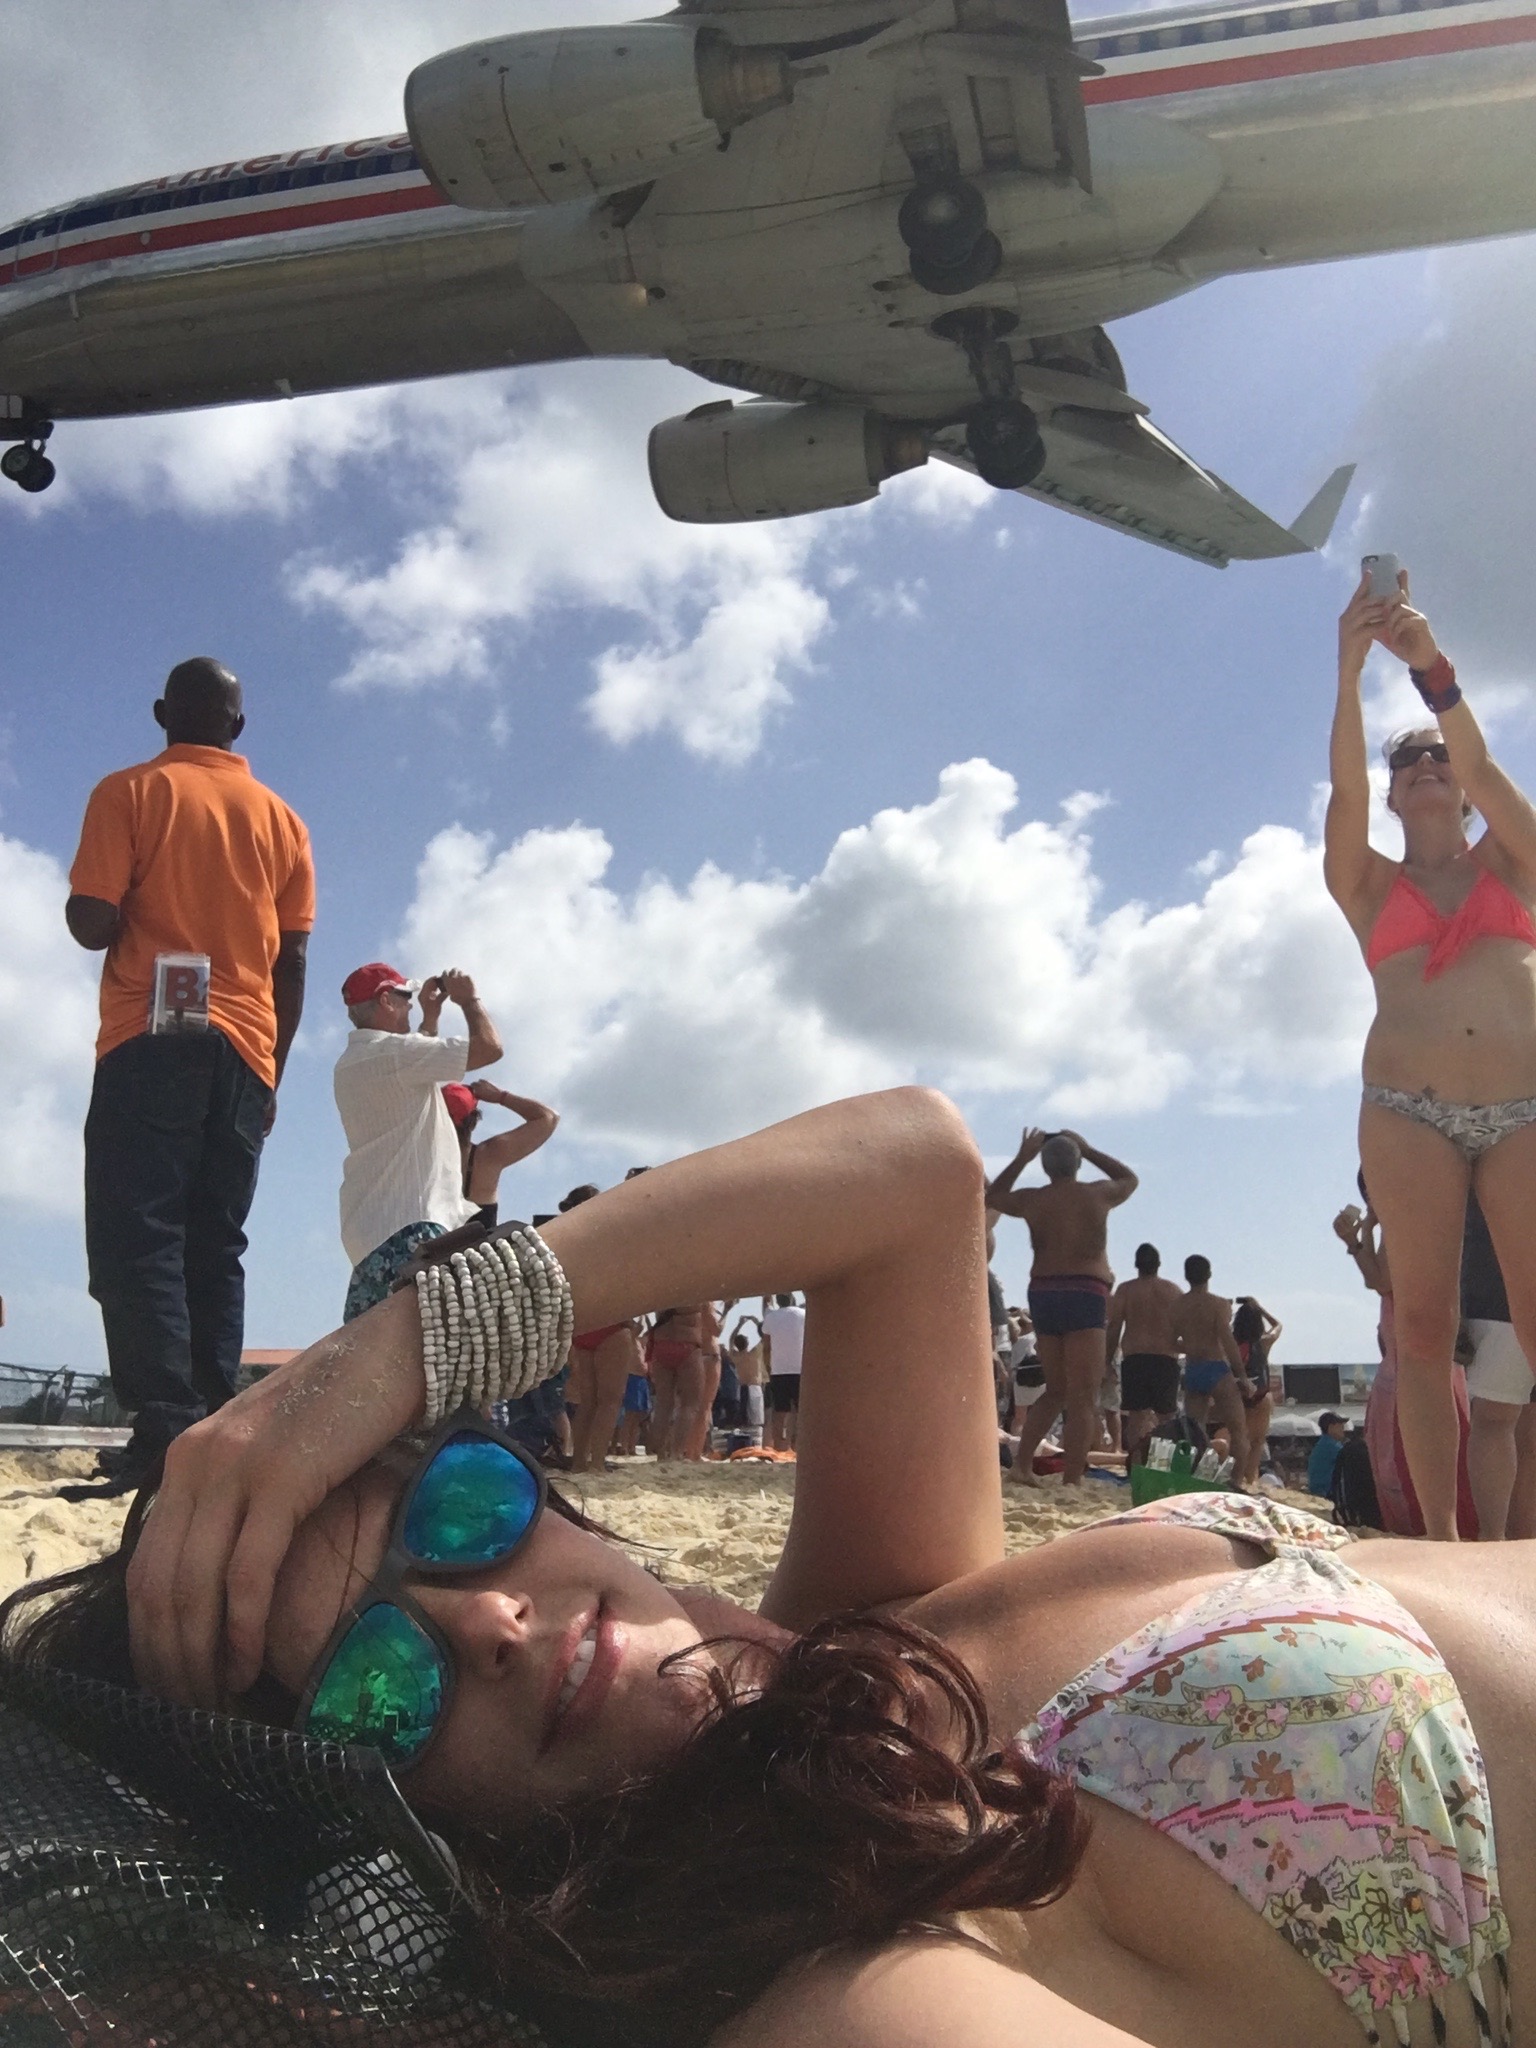 a woman lying on the beach with a plane in the background